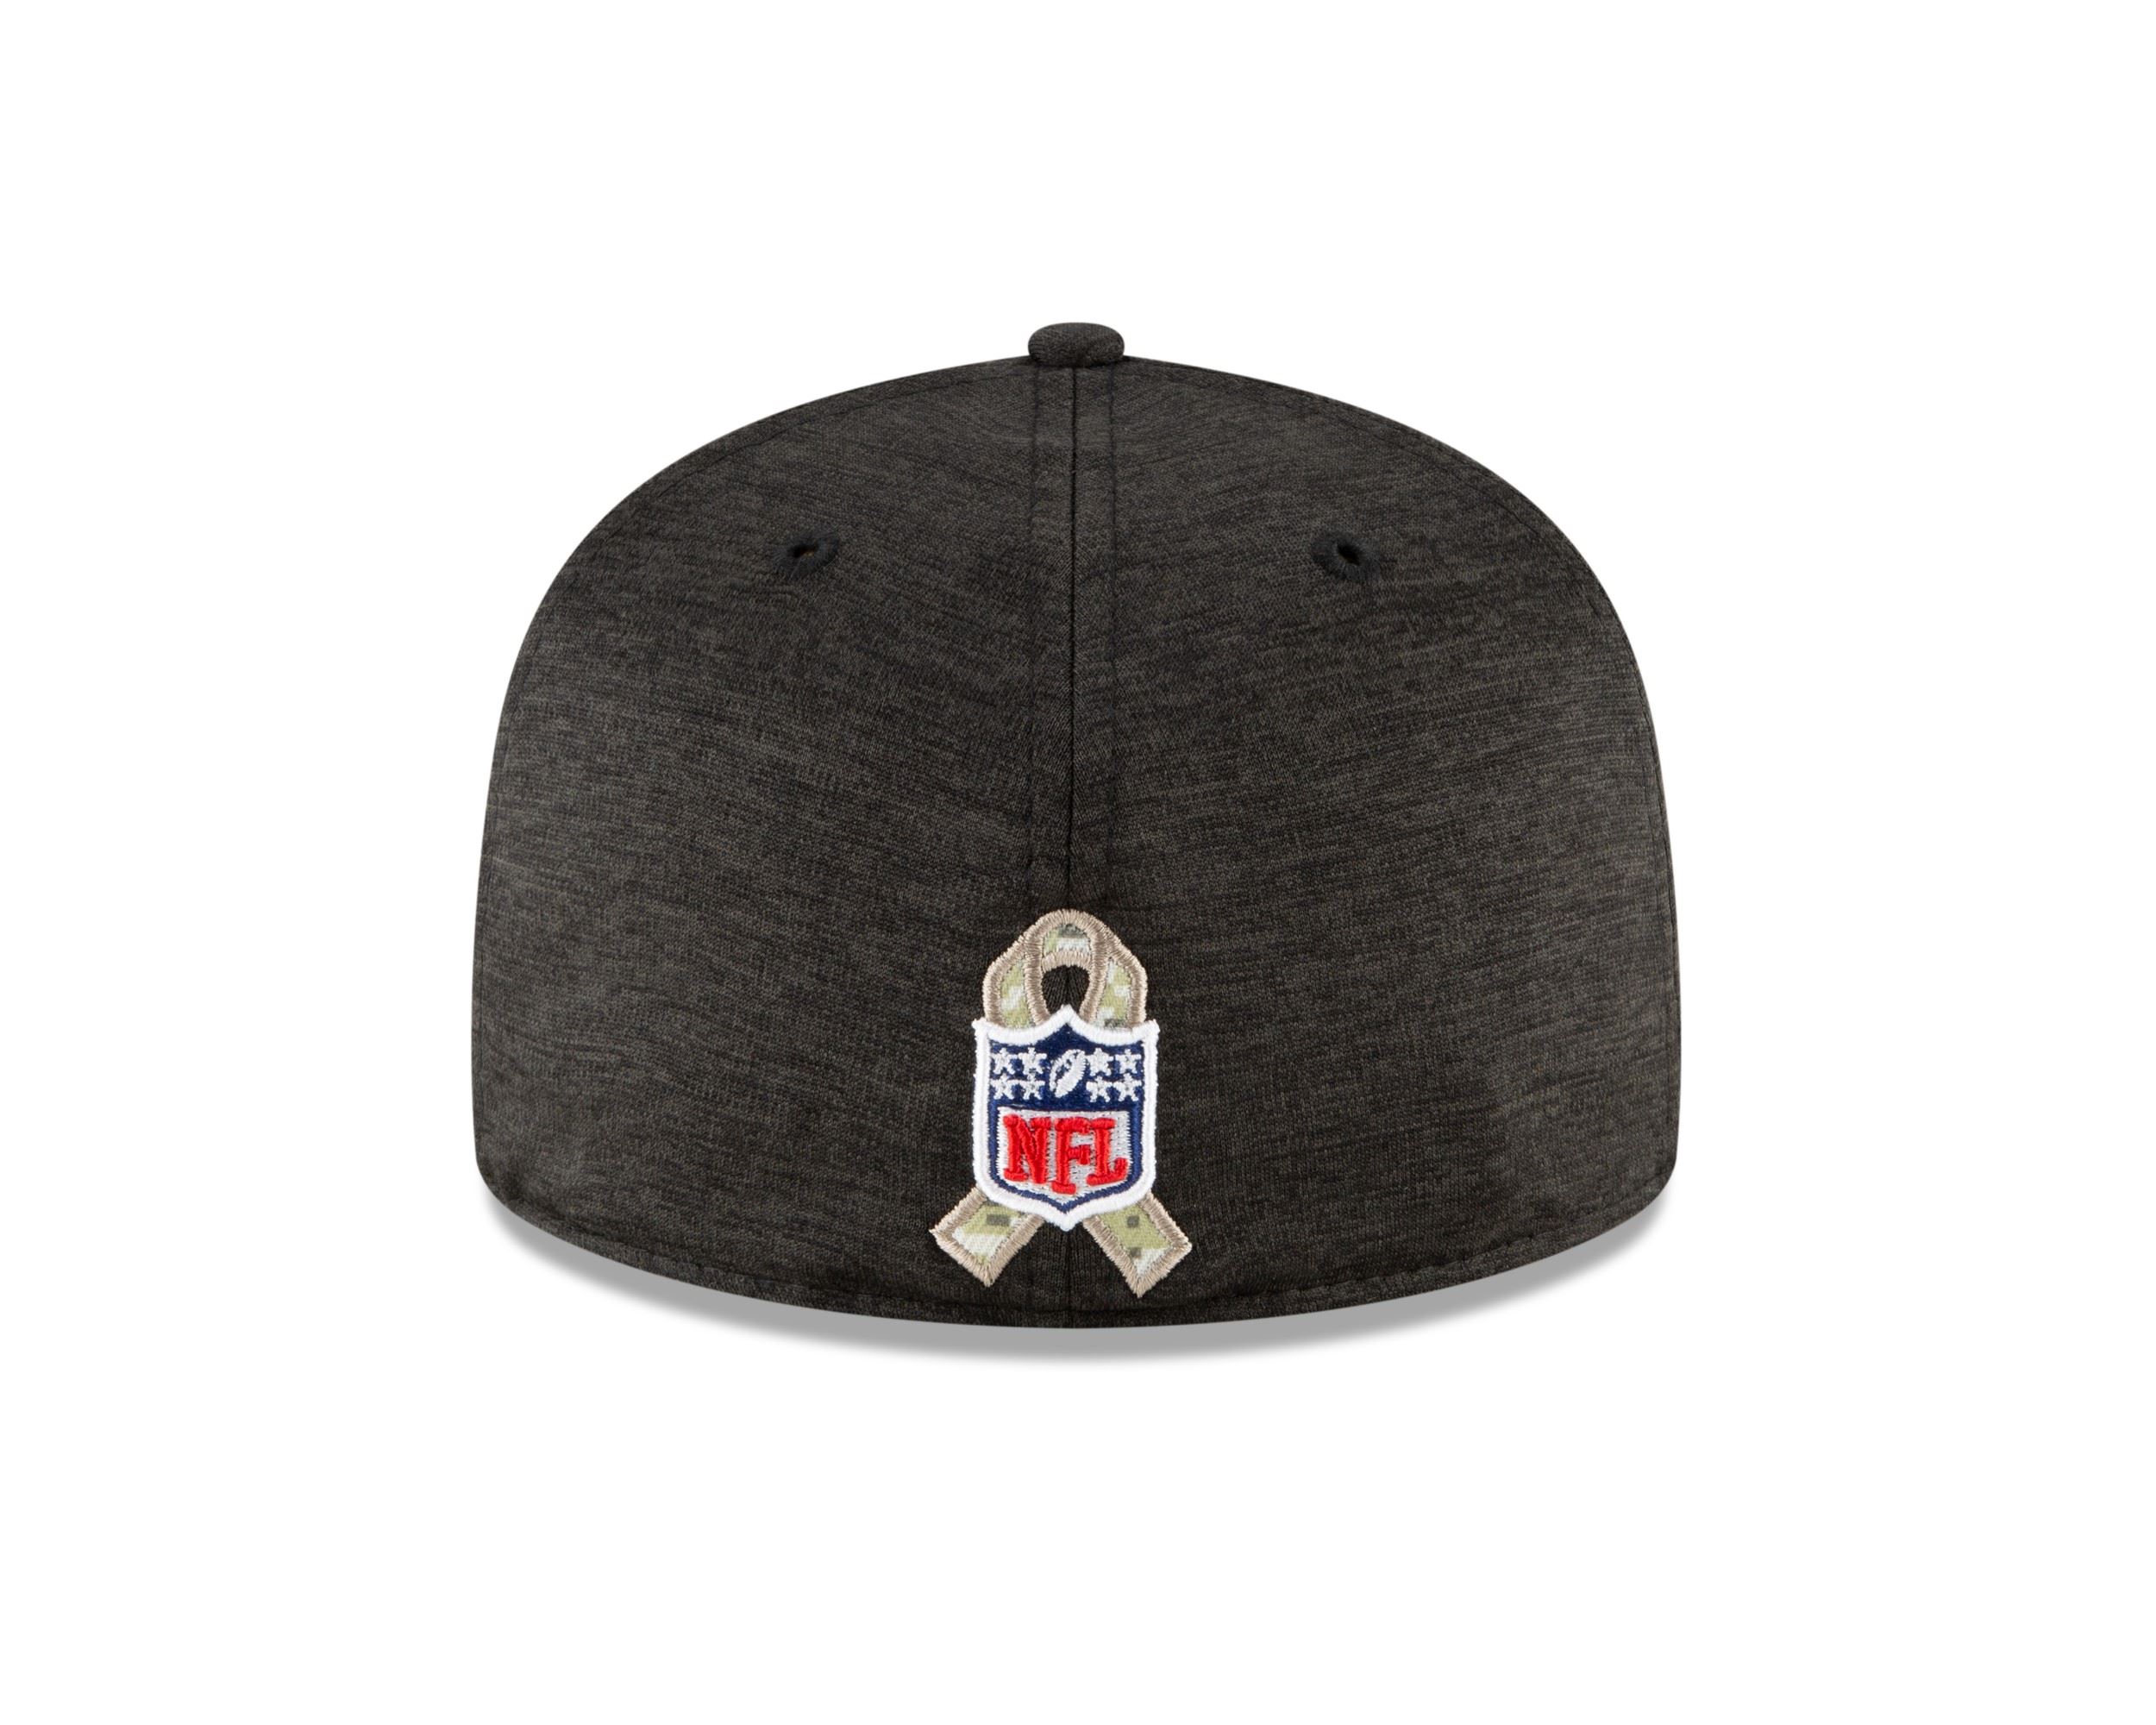 New York Jets Salute to Service 2020 59Fifty Cap New Era